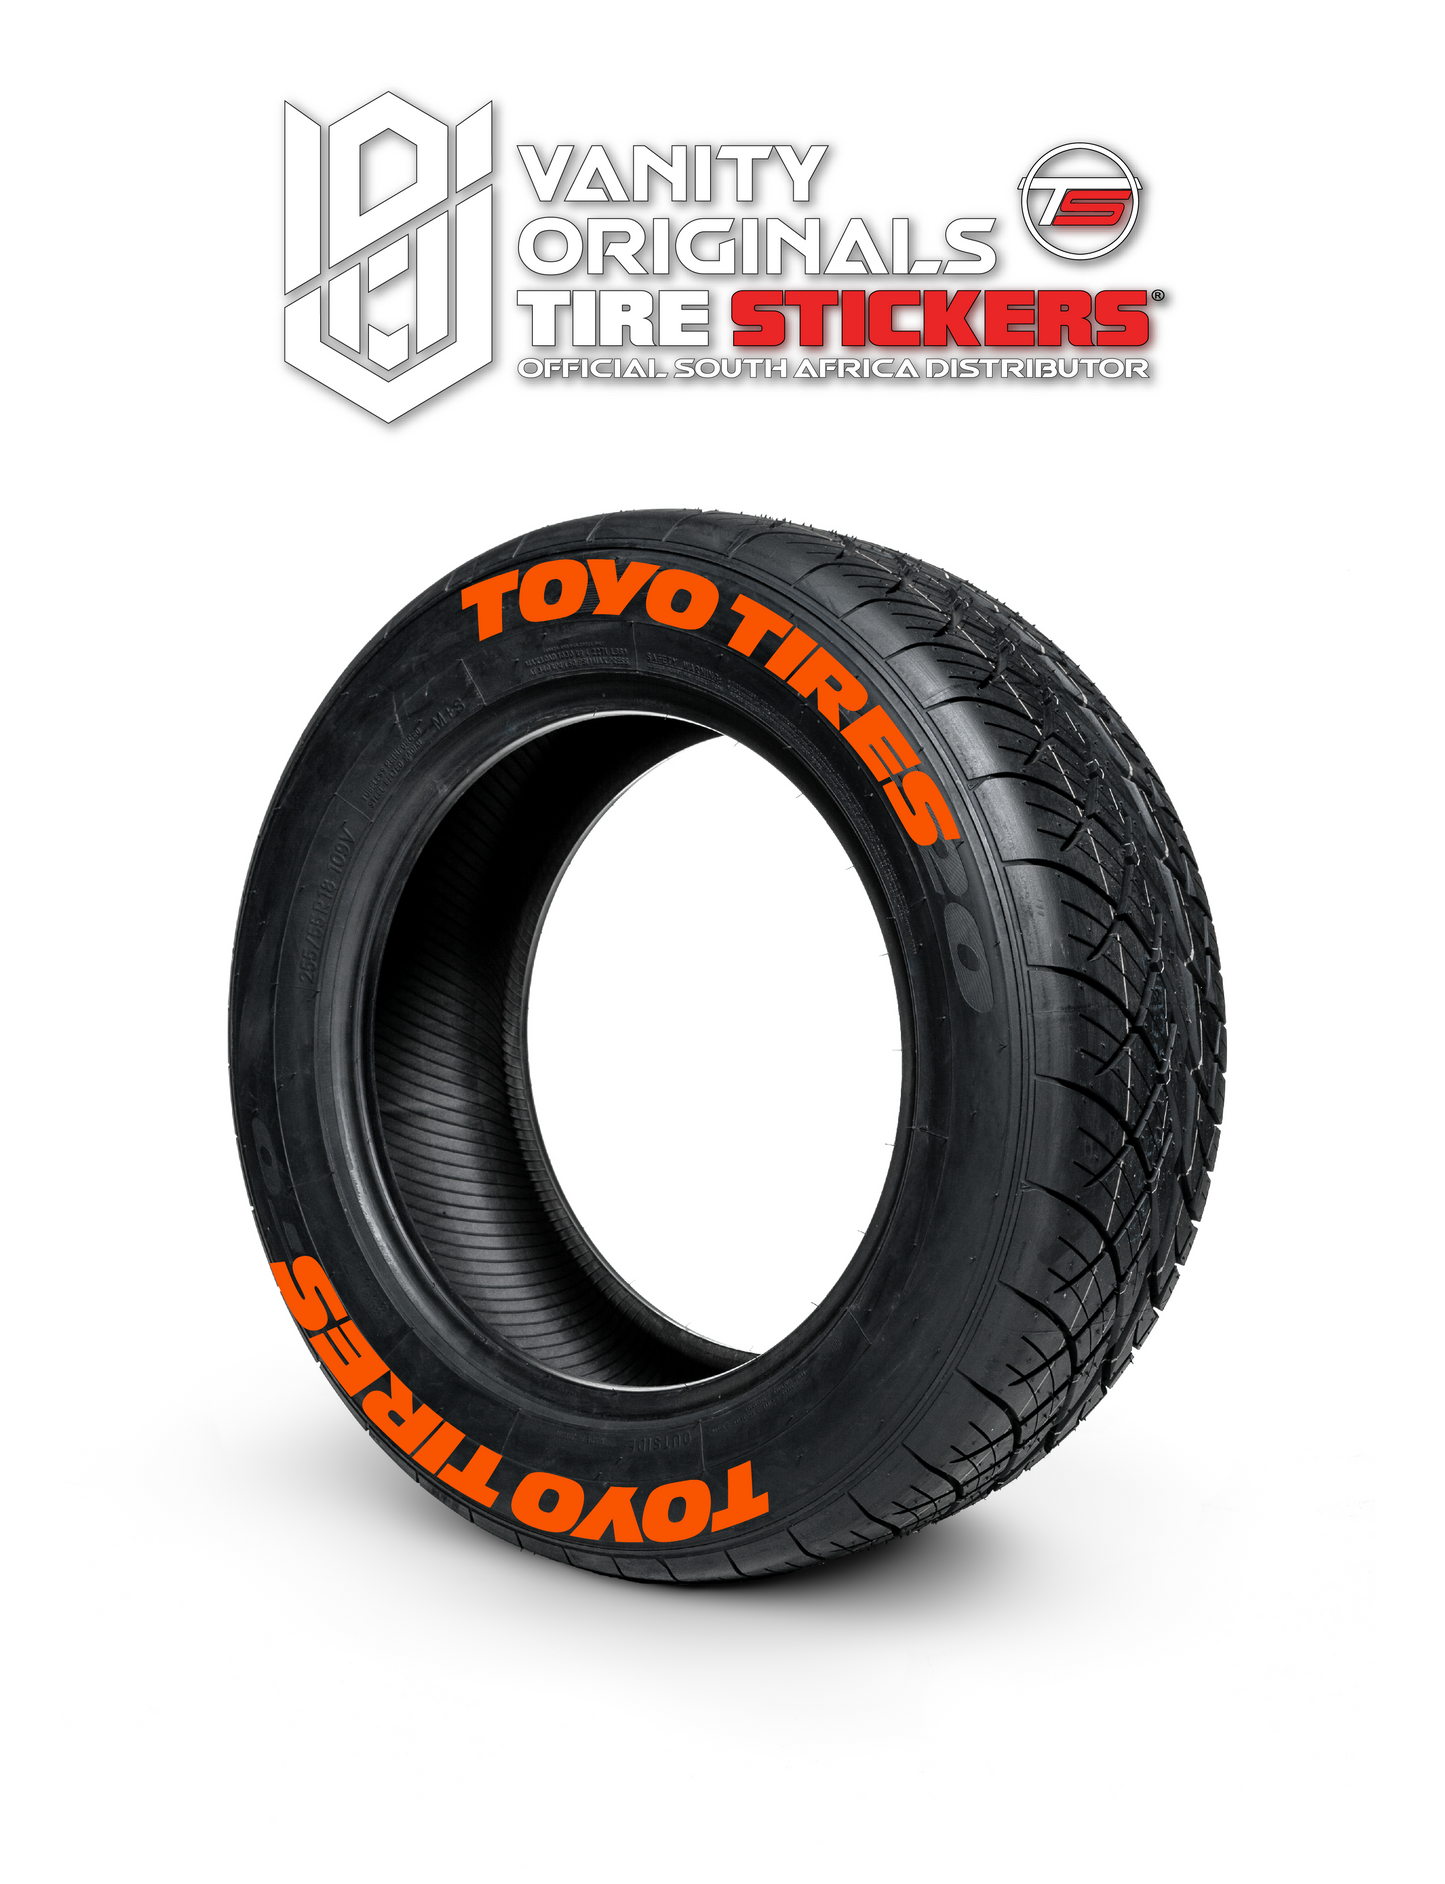 Toyo Tires ( 8x Rubber Decals, Adhesive & Instructions Included )